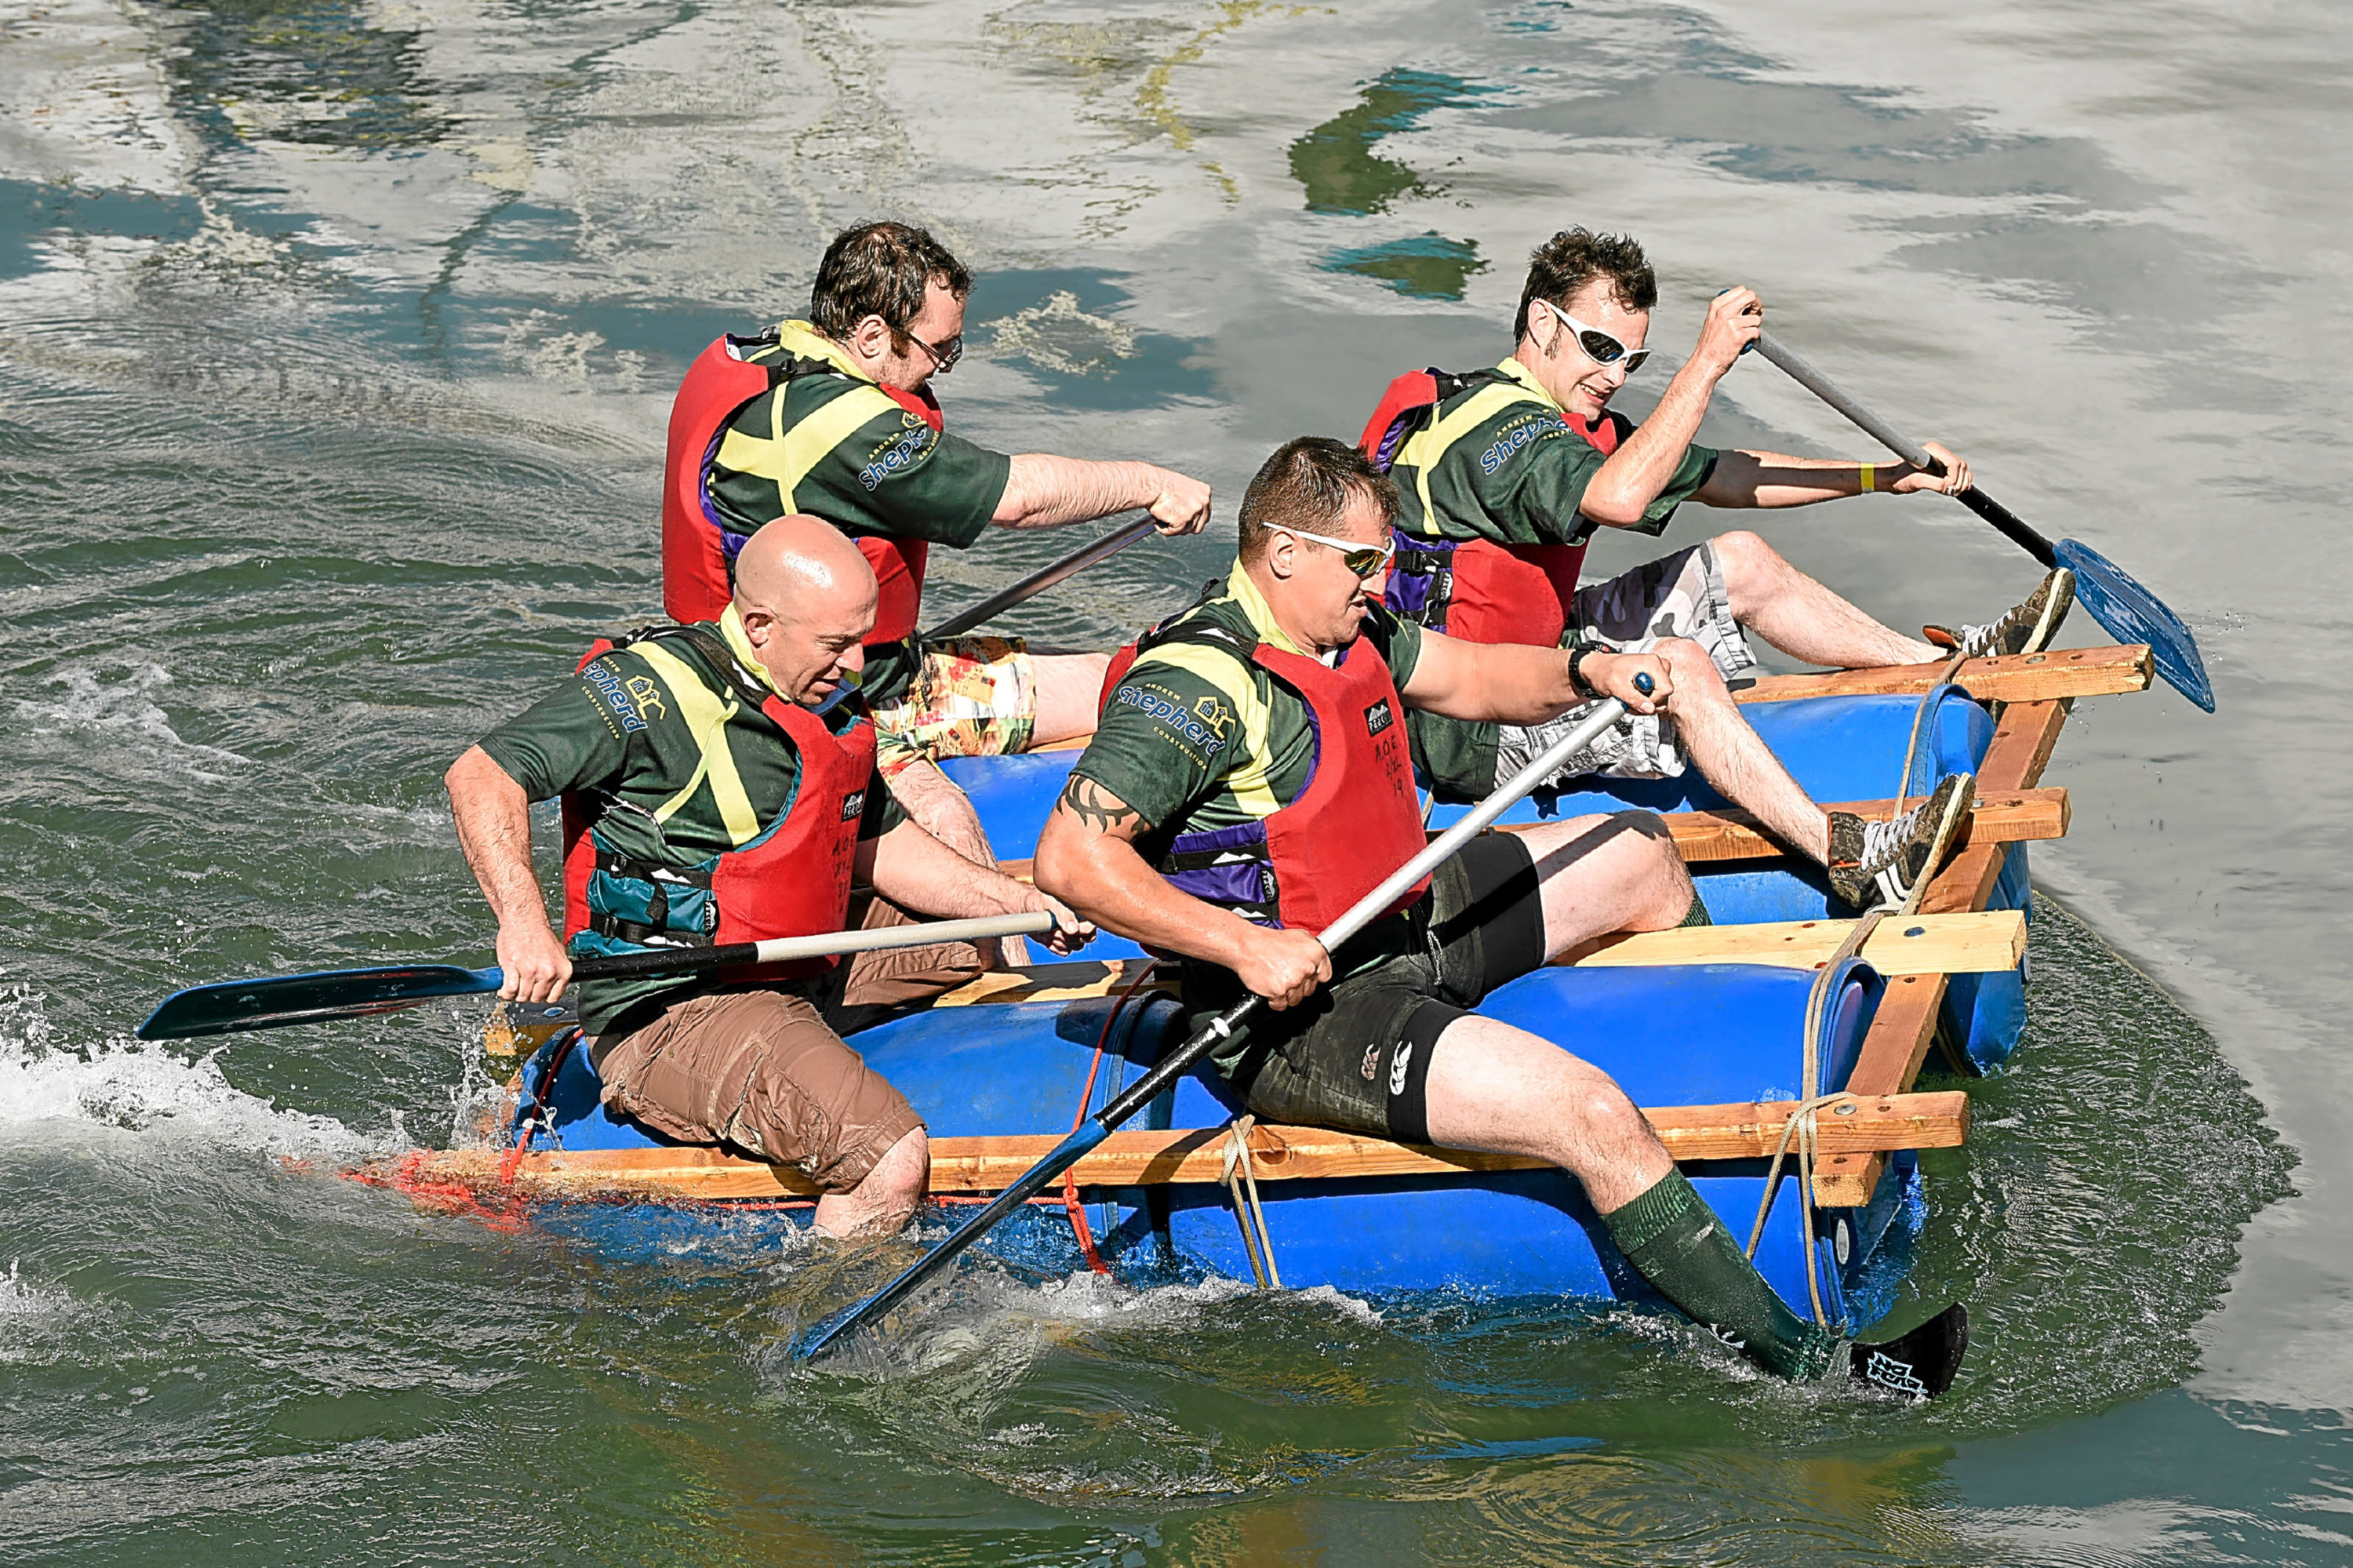 Competitors in the 2015 raft race.